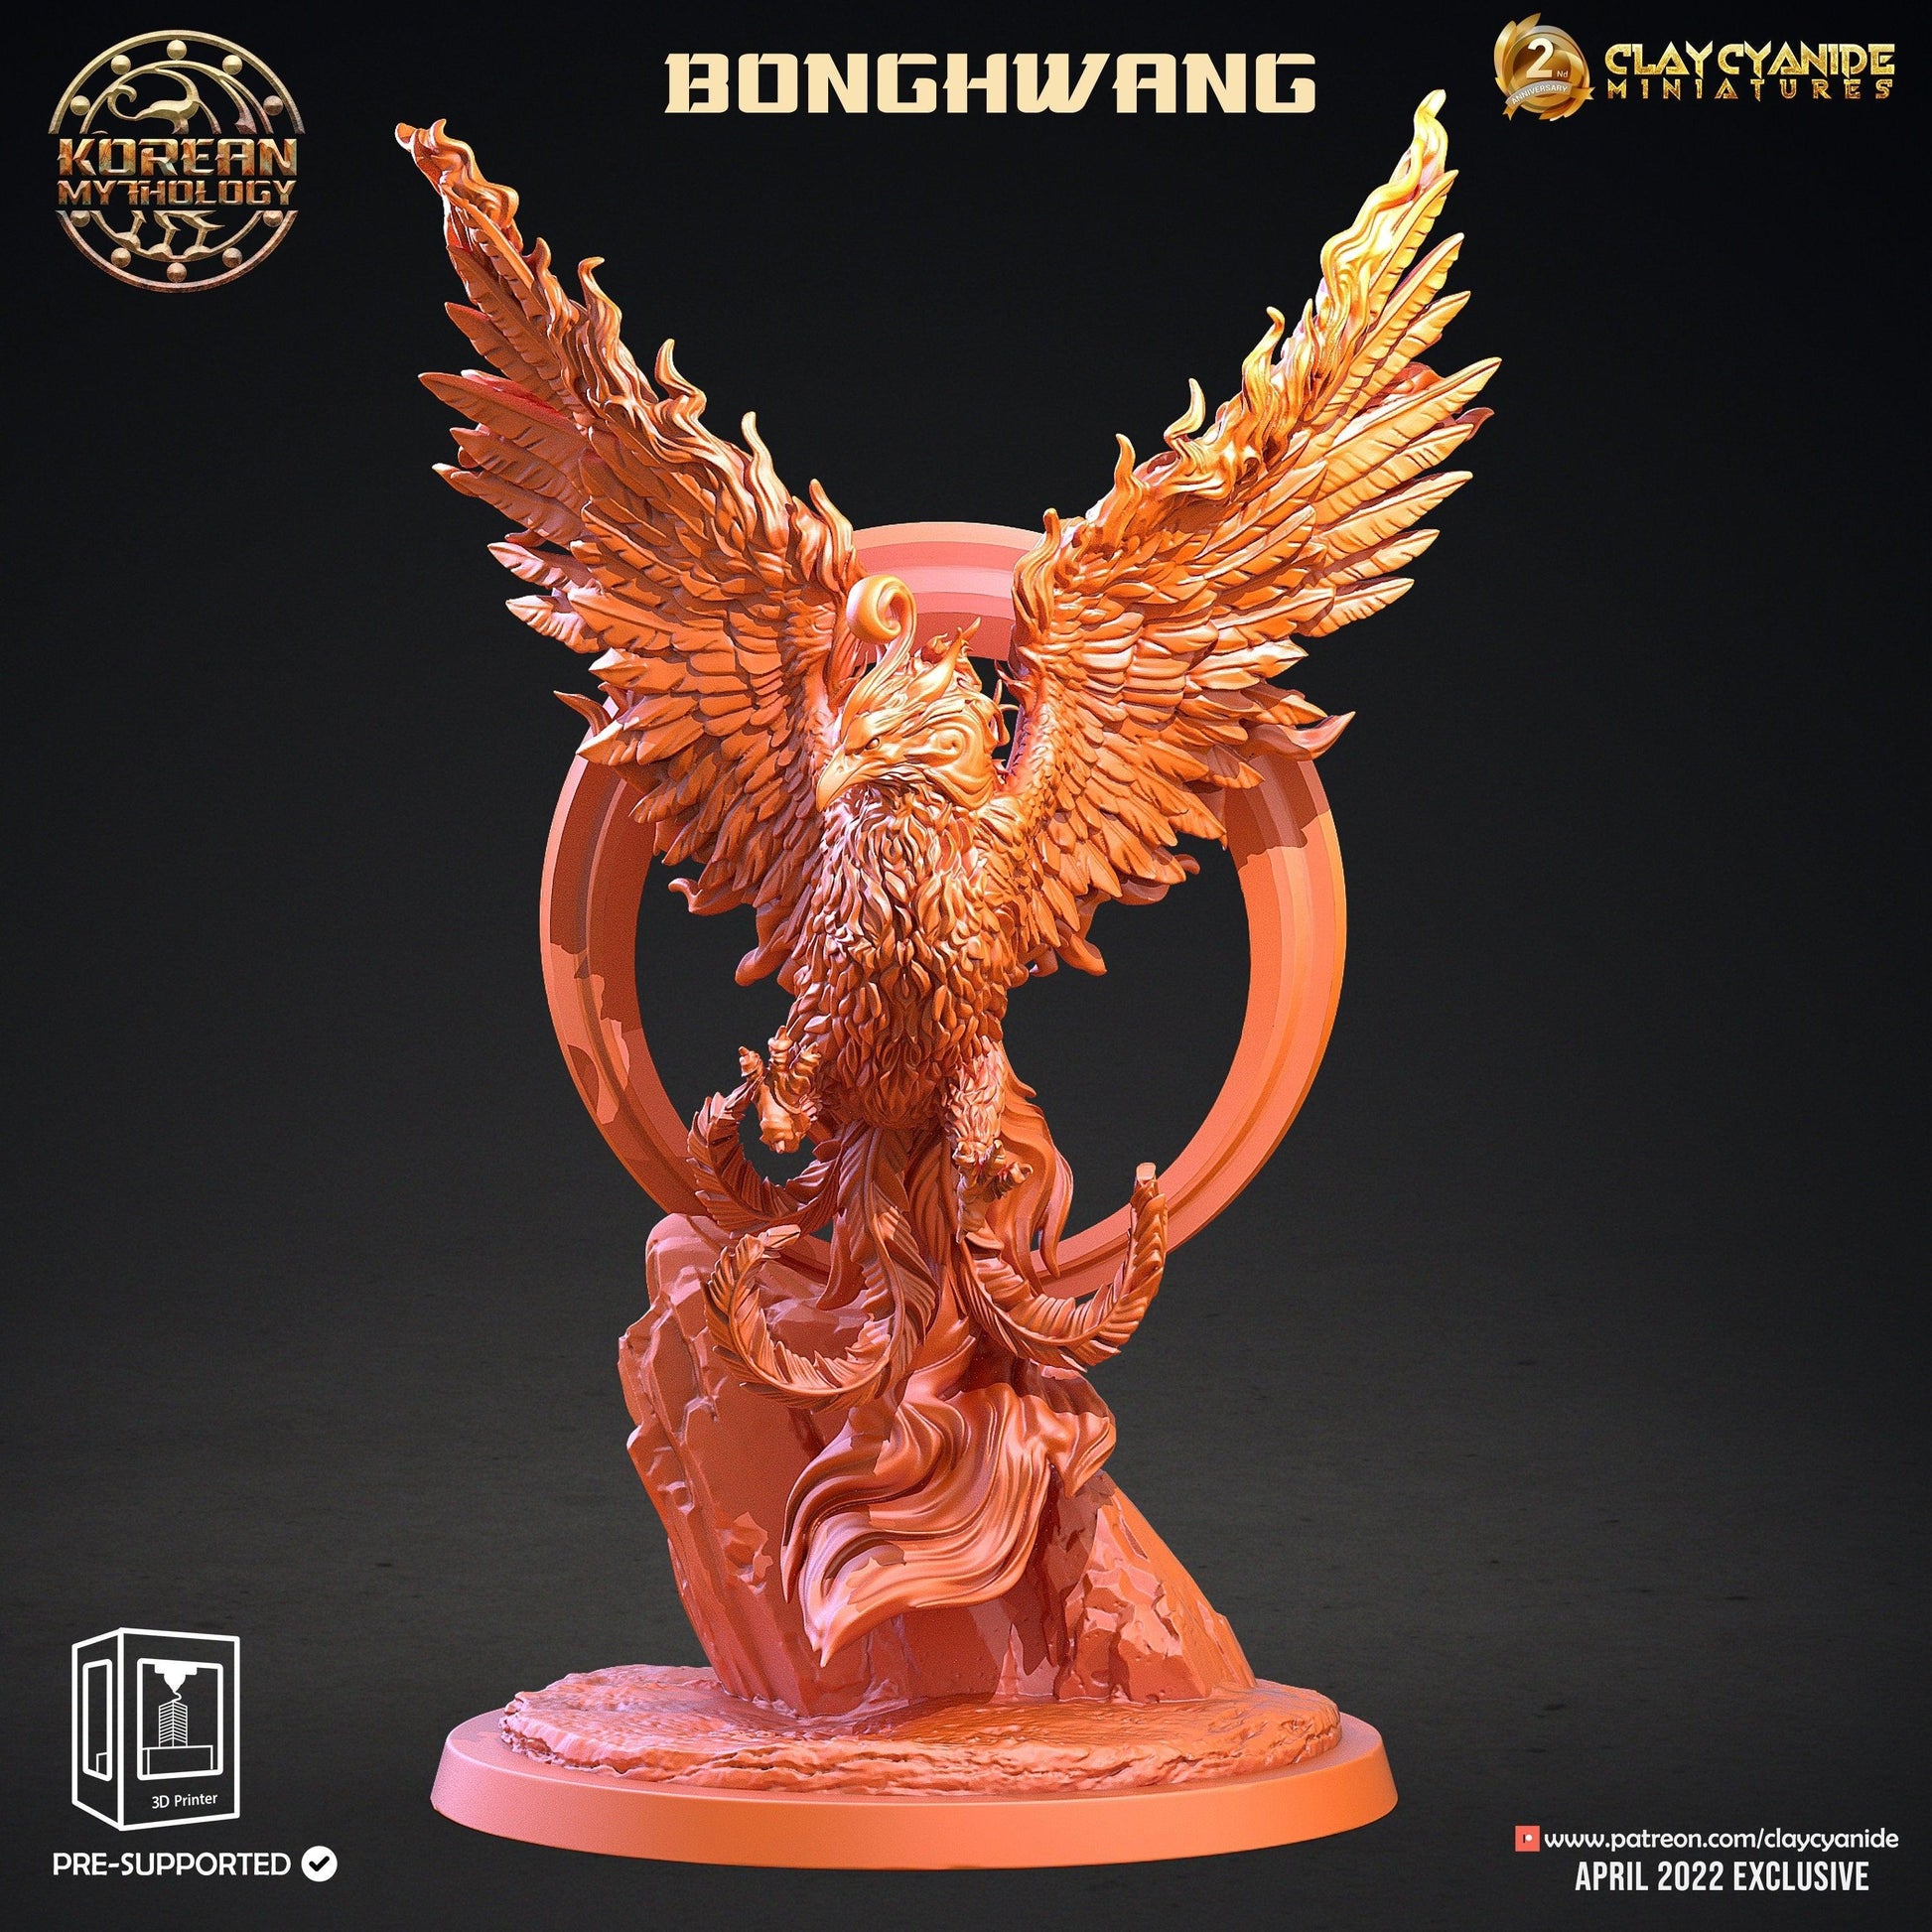 Bonghwang miniature | Clay Cyanide | Korean Mythology | Tabletop Gaming | DnD Miniature | Dungeons and Dragons | Korean phoenix miniatures - Plague Miniatures shop for DnD Miniatures